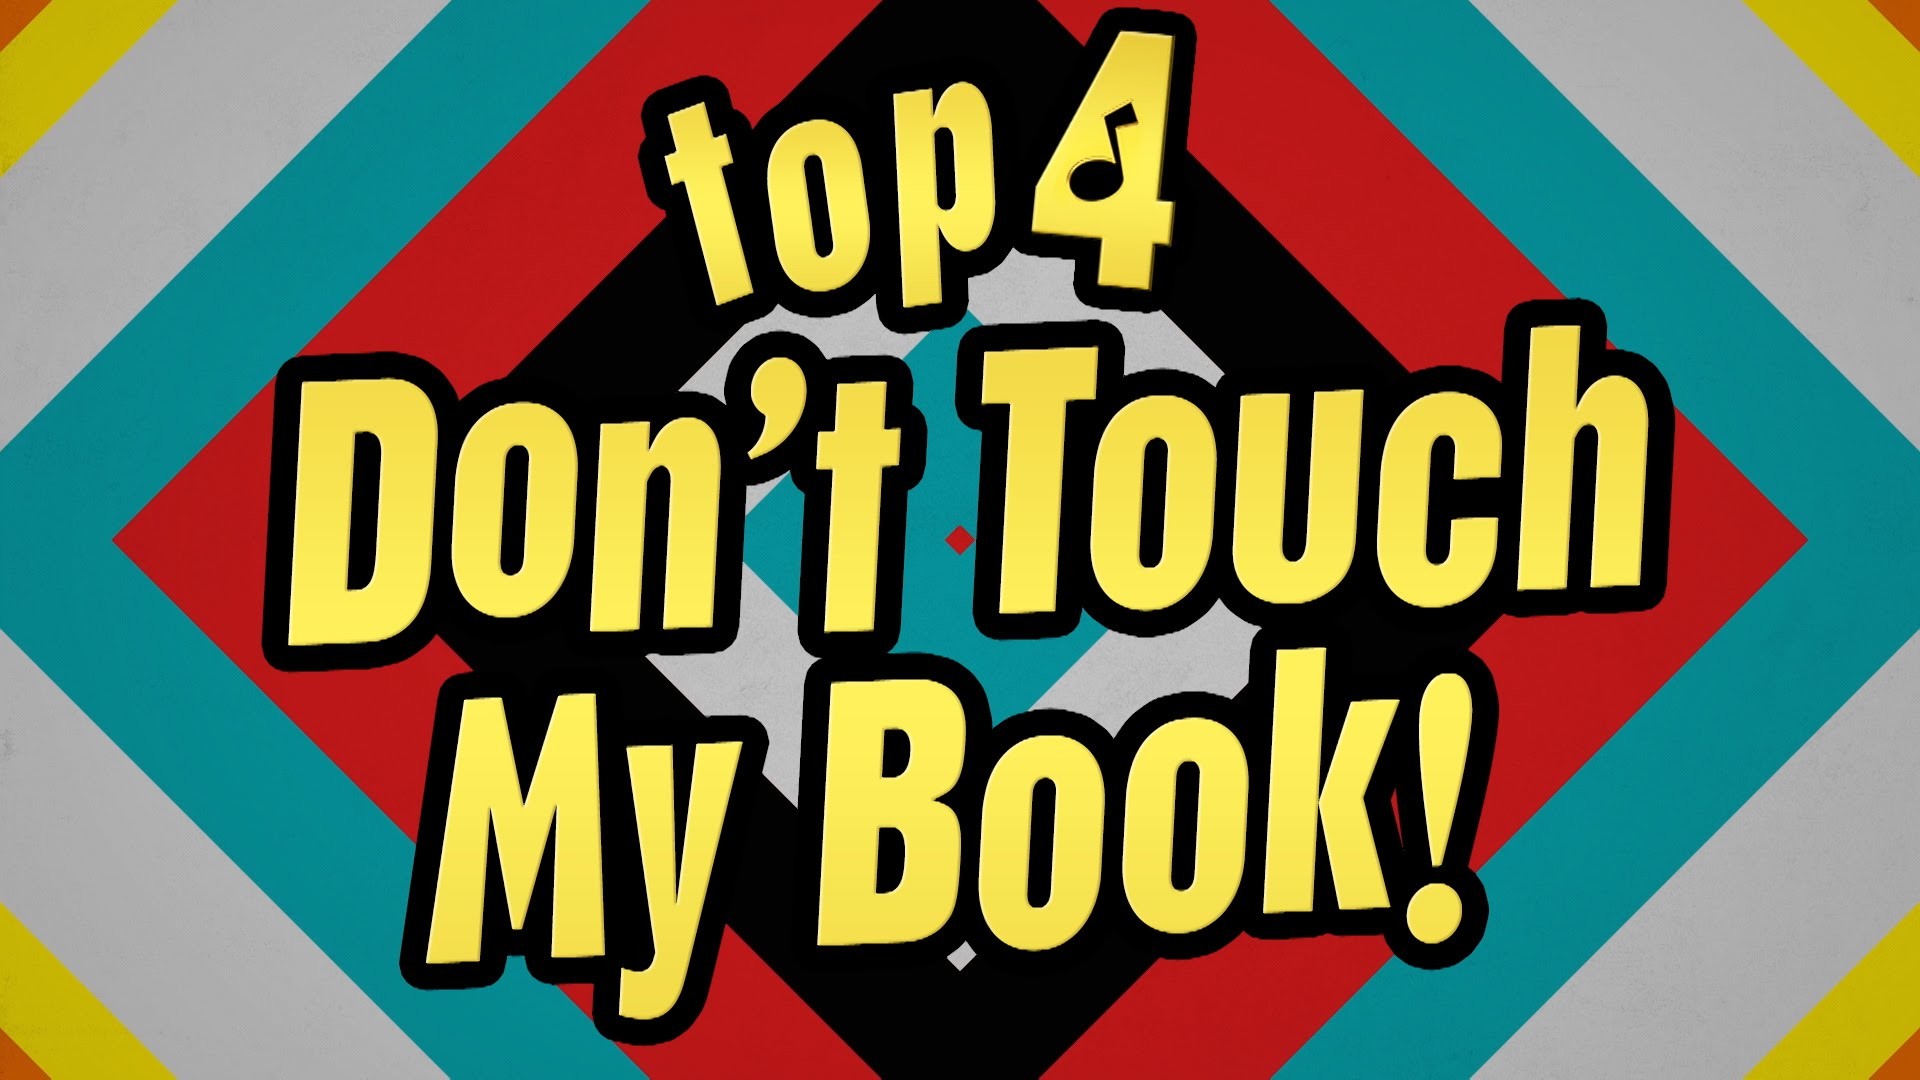 Austin Ally Top 4 Dont Touch My Book Official Disney Channel UK – YouTube